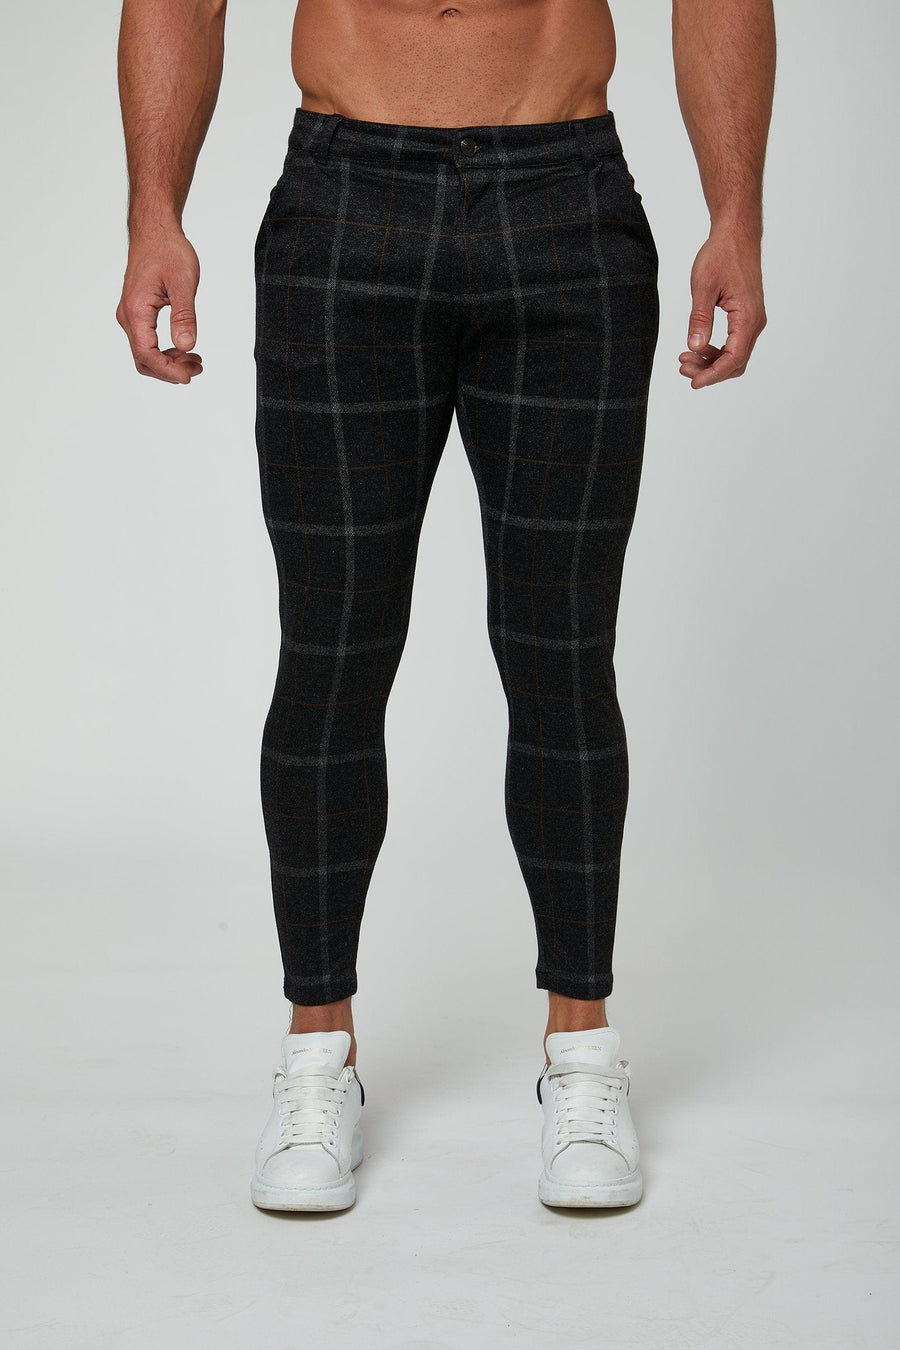 Legend London Trousers Checkered Stretch Trousers -  Black